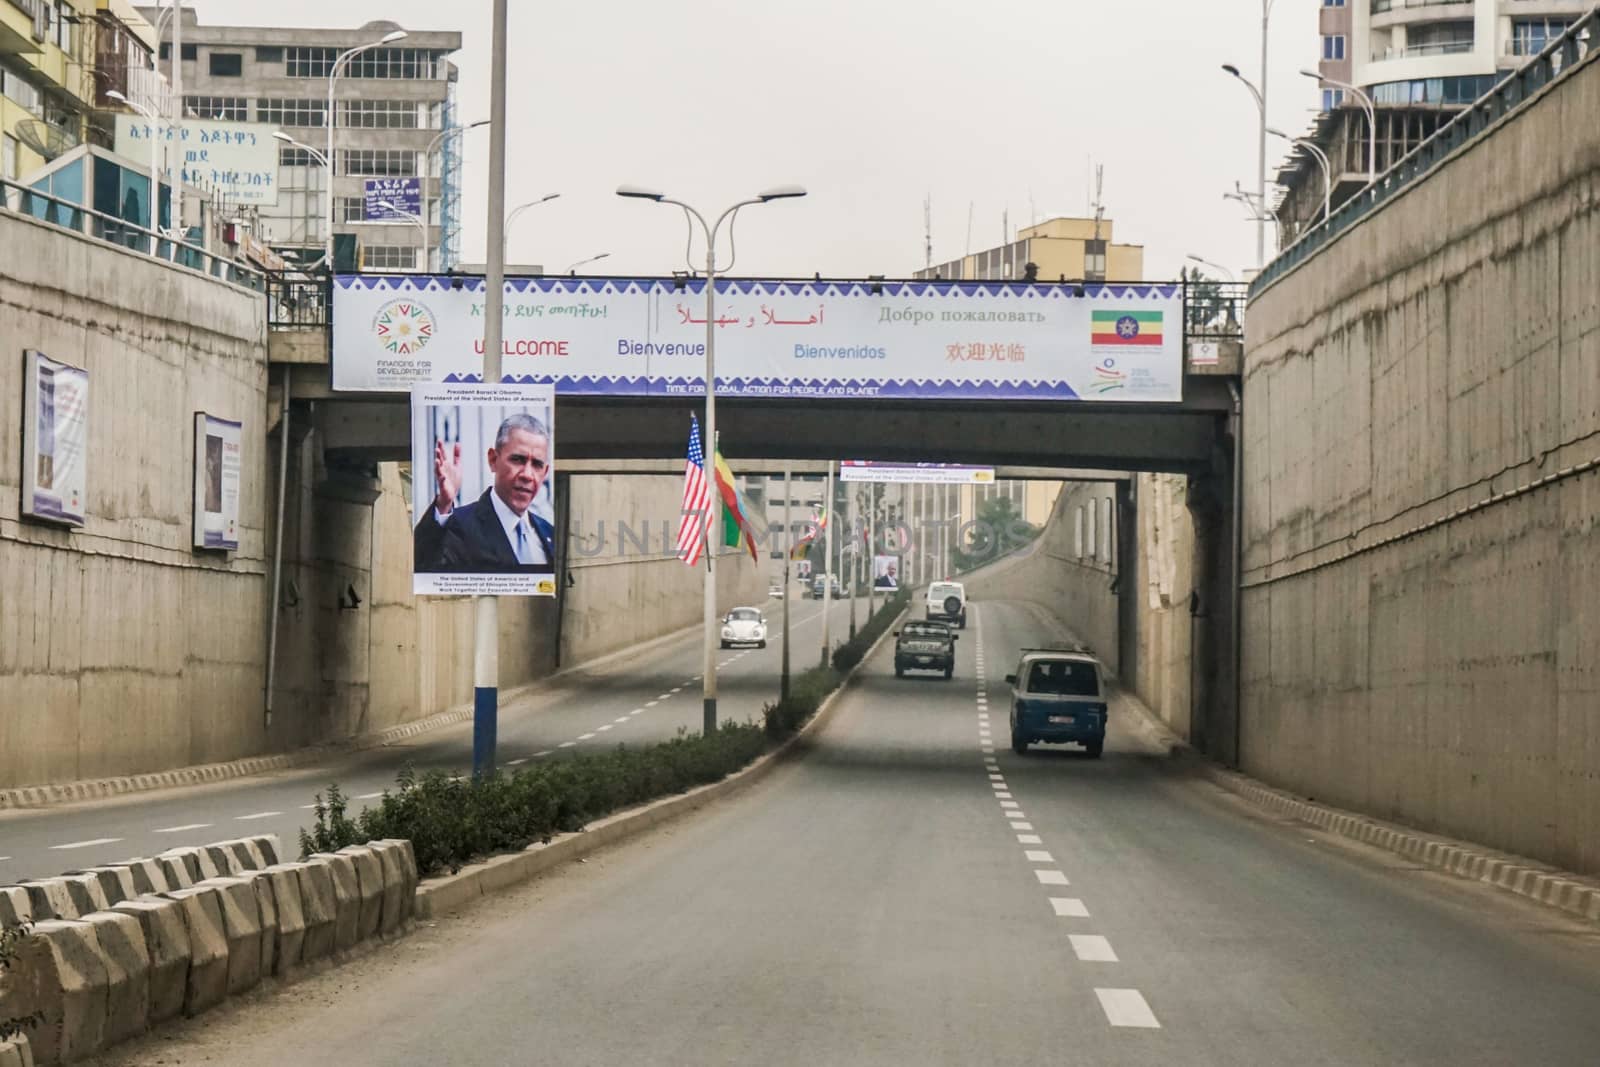 Addis Ababa - July 26: US Flags and pictures of President Barak Obama were posted on the streets of Addis Ababa, in preparation for Obama's historic visit to the country on on July 26, 2015, in Addis Ababa, Ethiopia.